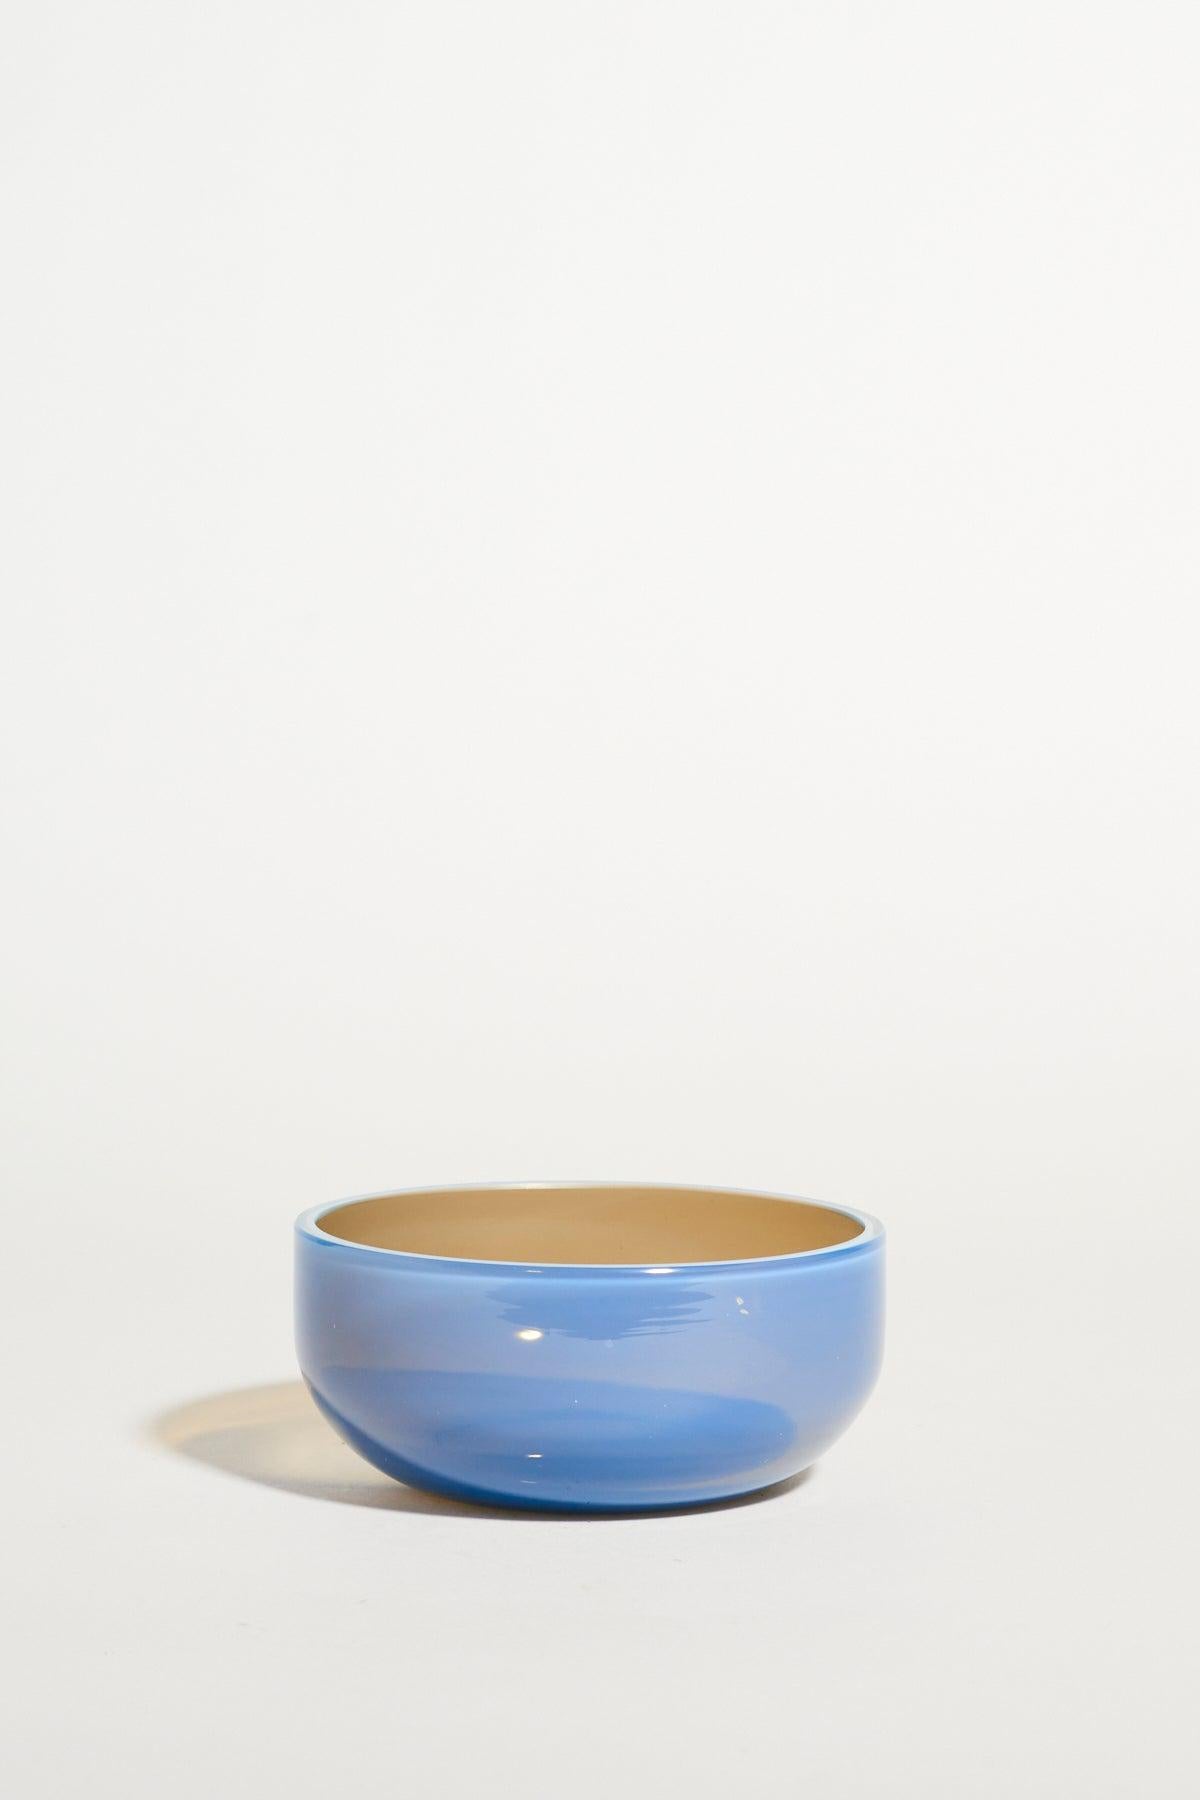 Simple classic Murano bowl in opalescent periwinkle blue glass with a pale coffee beige interior.